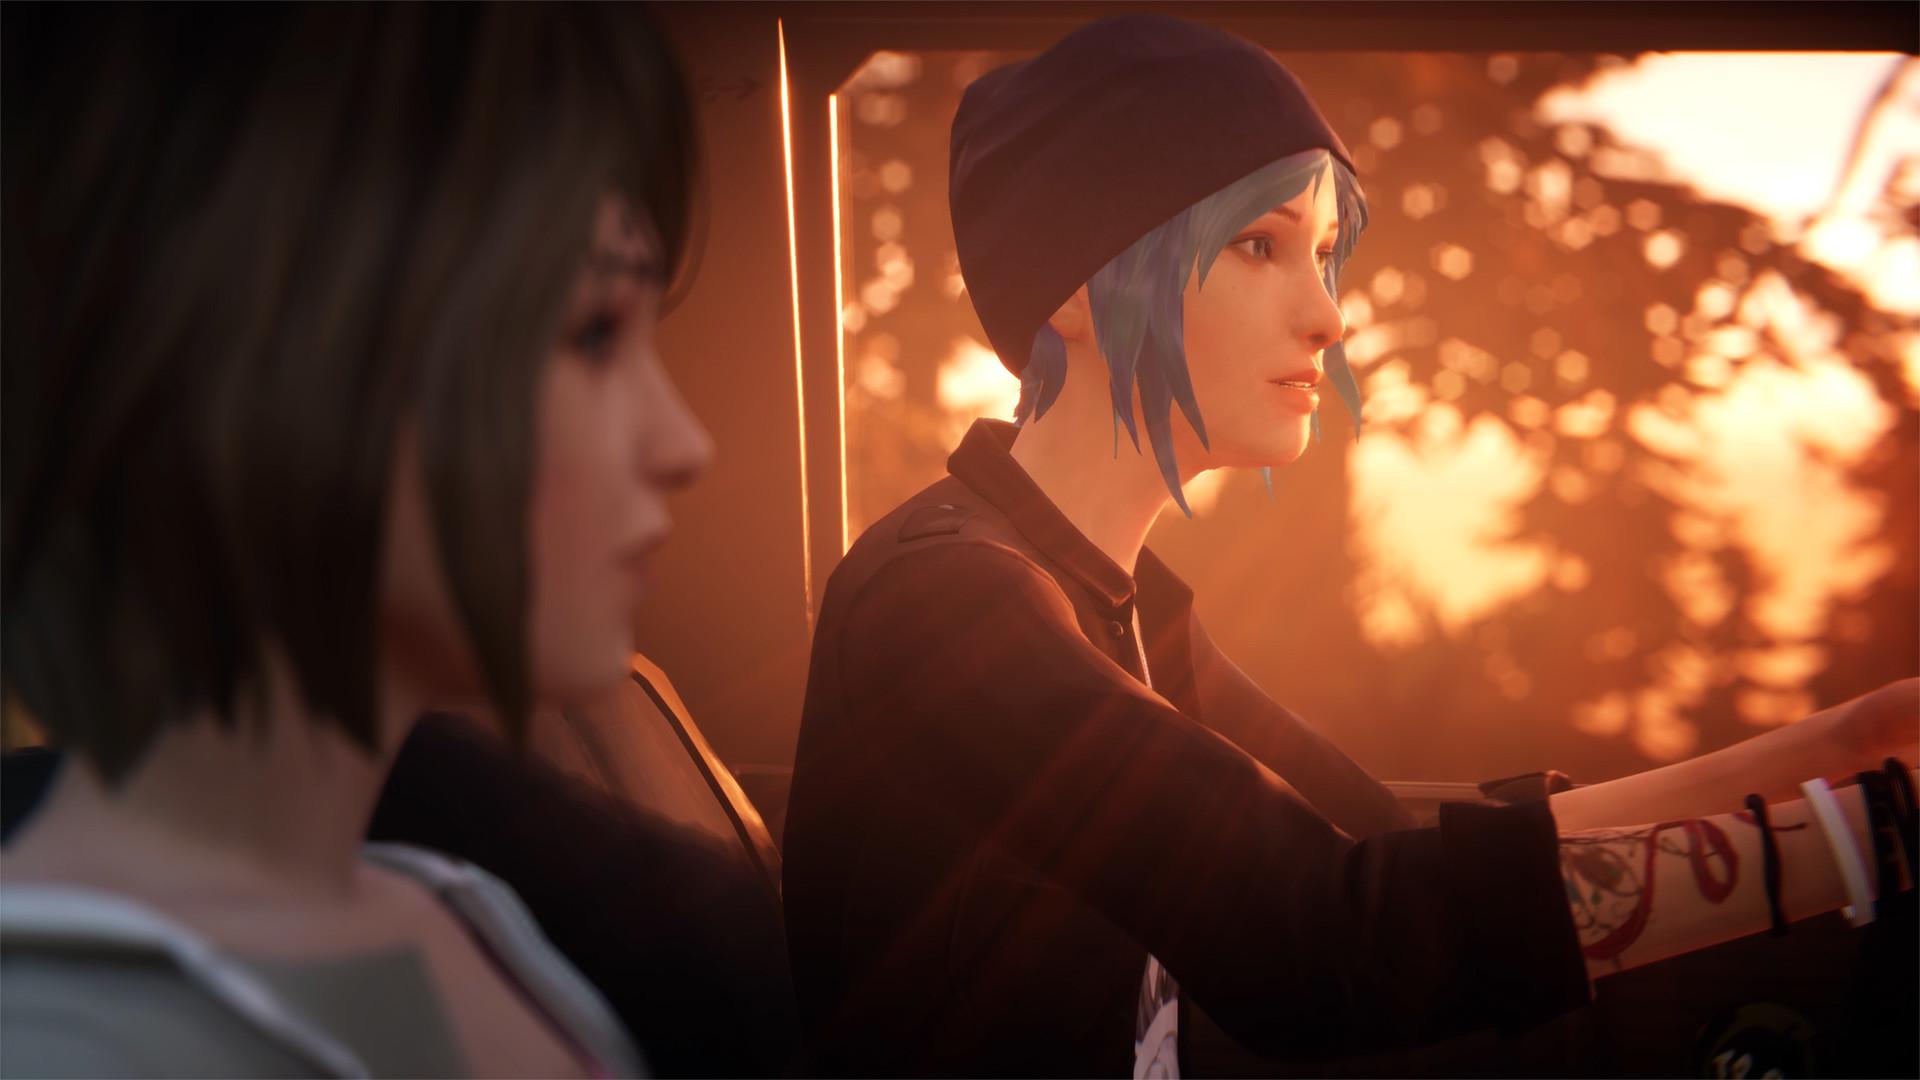 Screenshot №2 from game Life is Strange Remastered